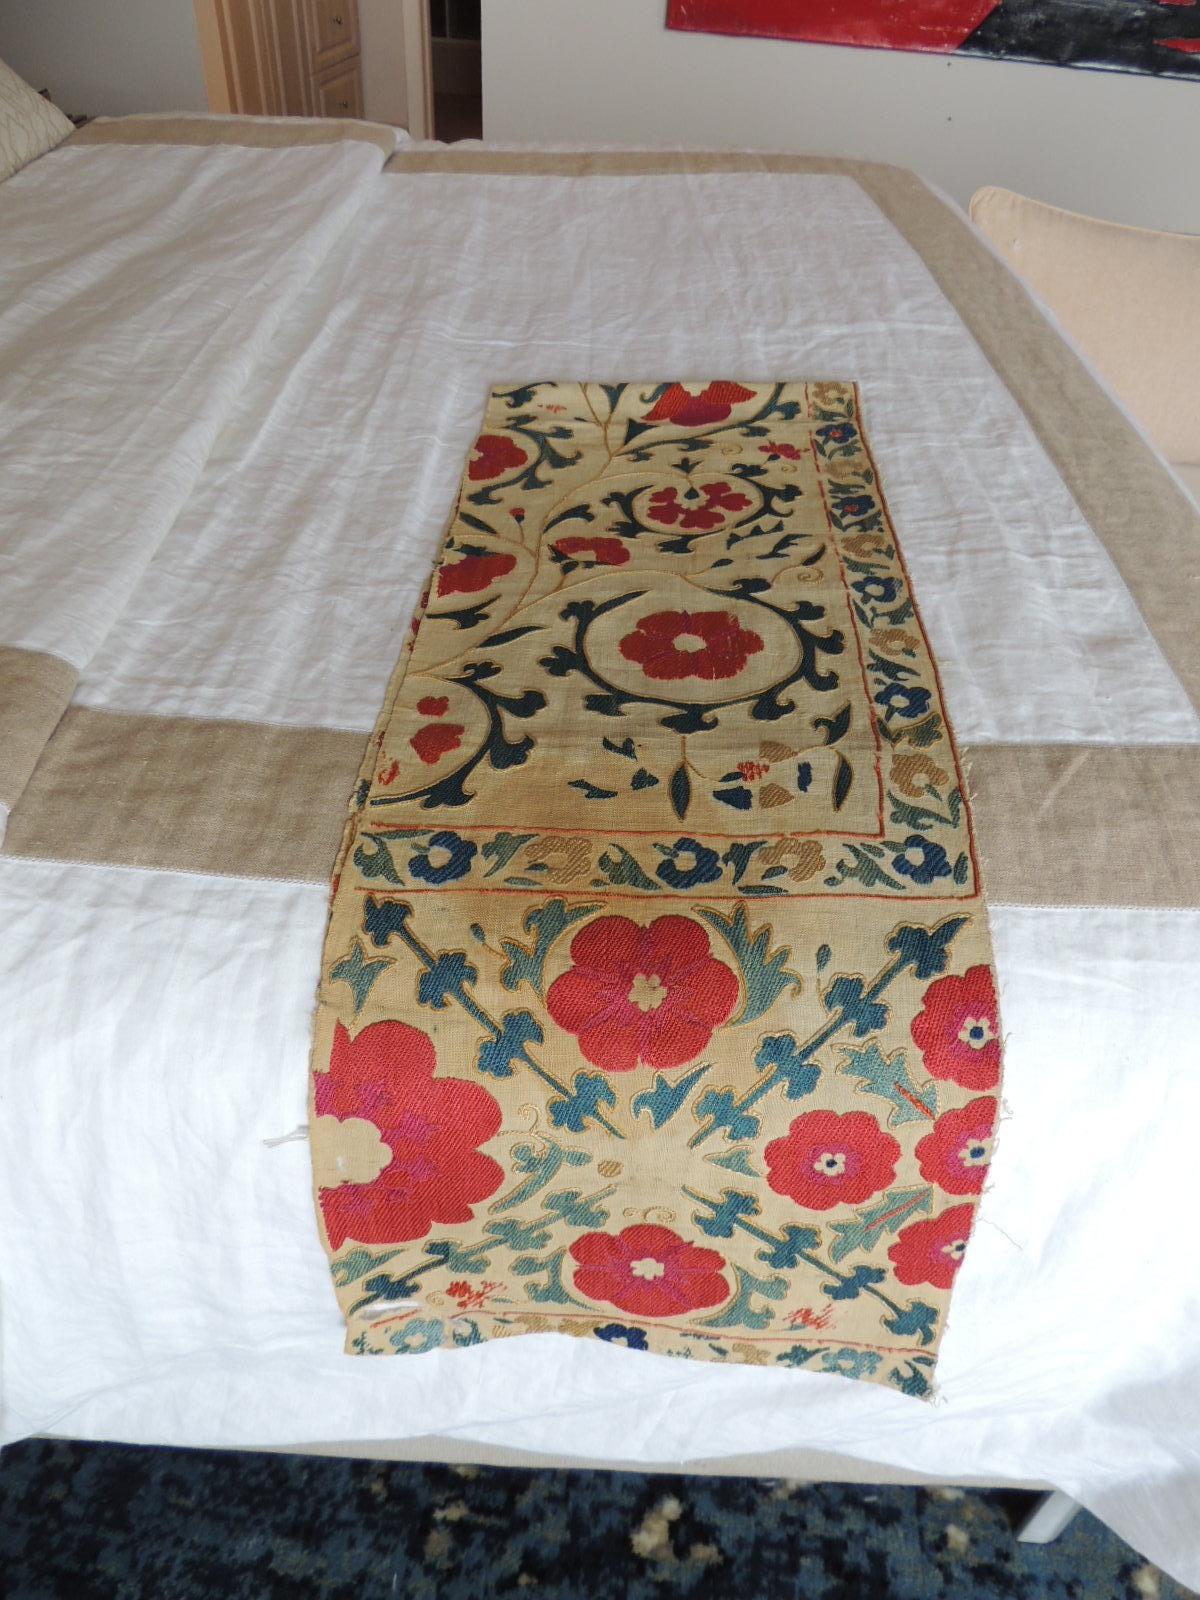 Antique red and green floral Suzani table Runner
Large and small embroidered flowers in shades of orange, green, blue, aqua, 
turquoise, yellow and natural.
Silk embroidered on linen.
Minor stains from age.
Size: 12